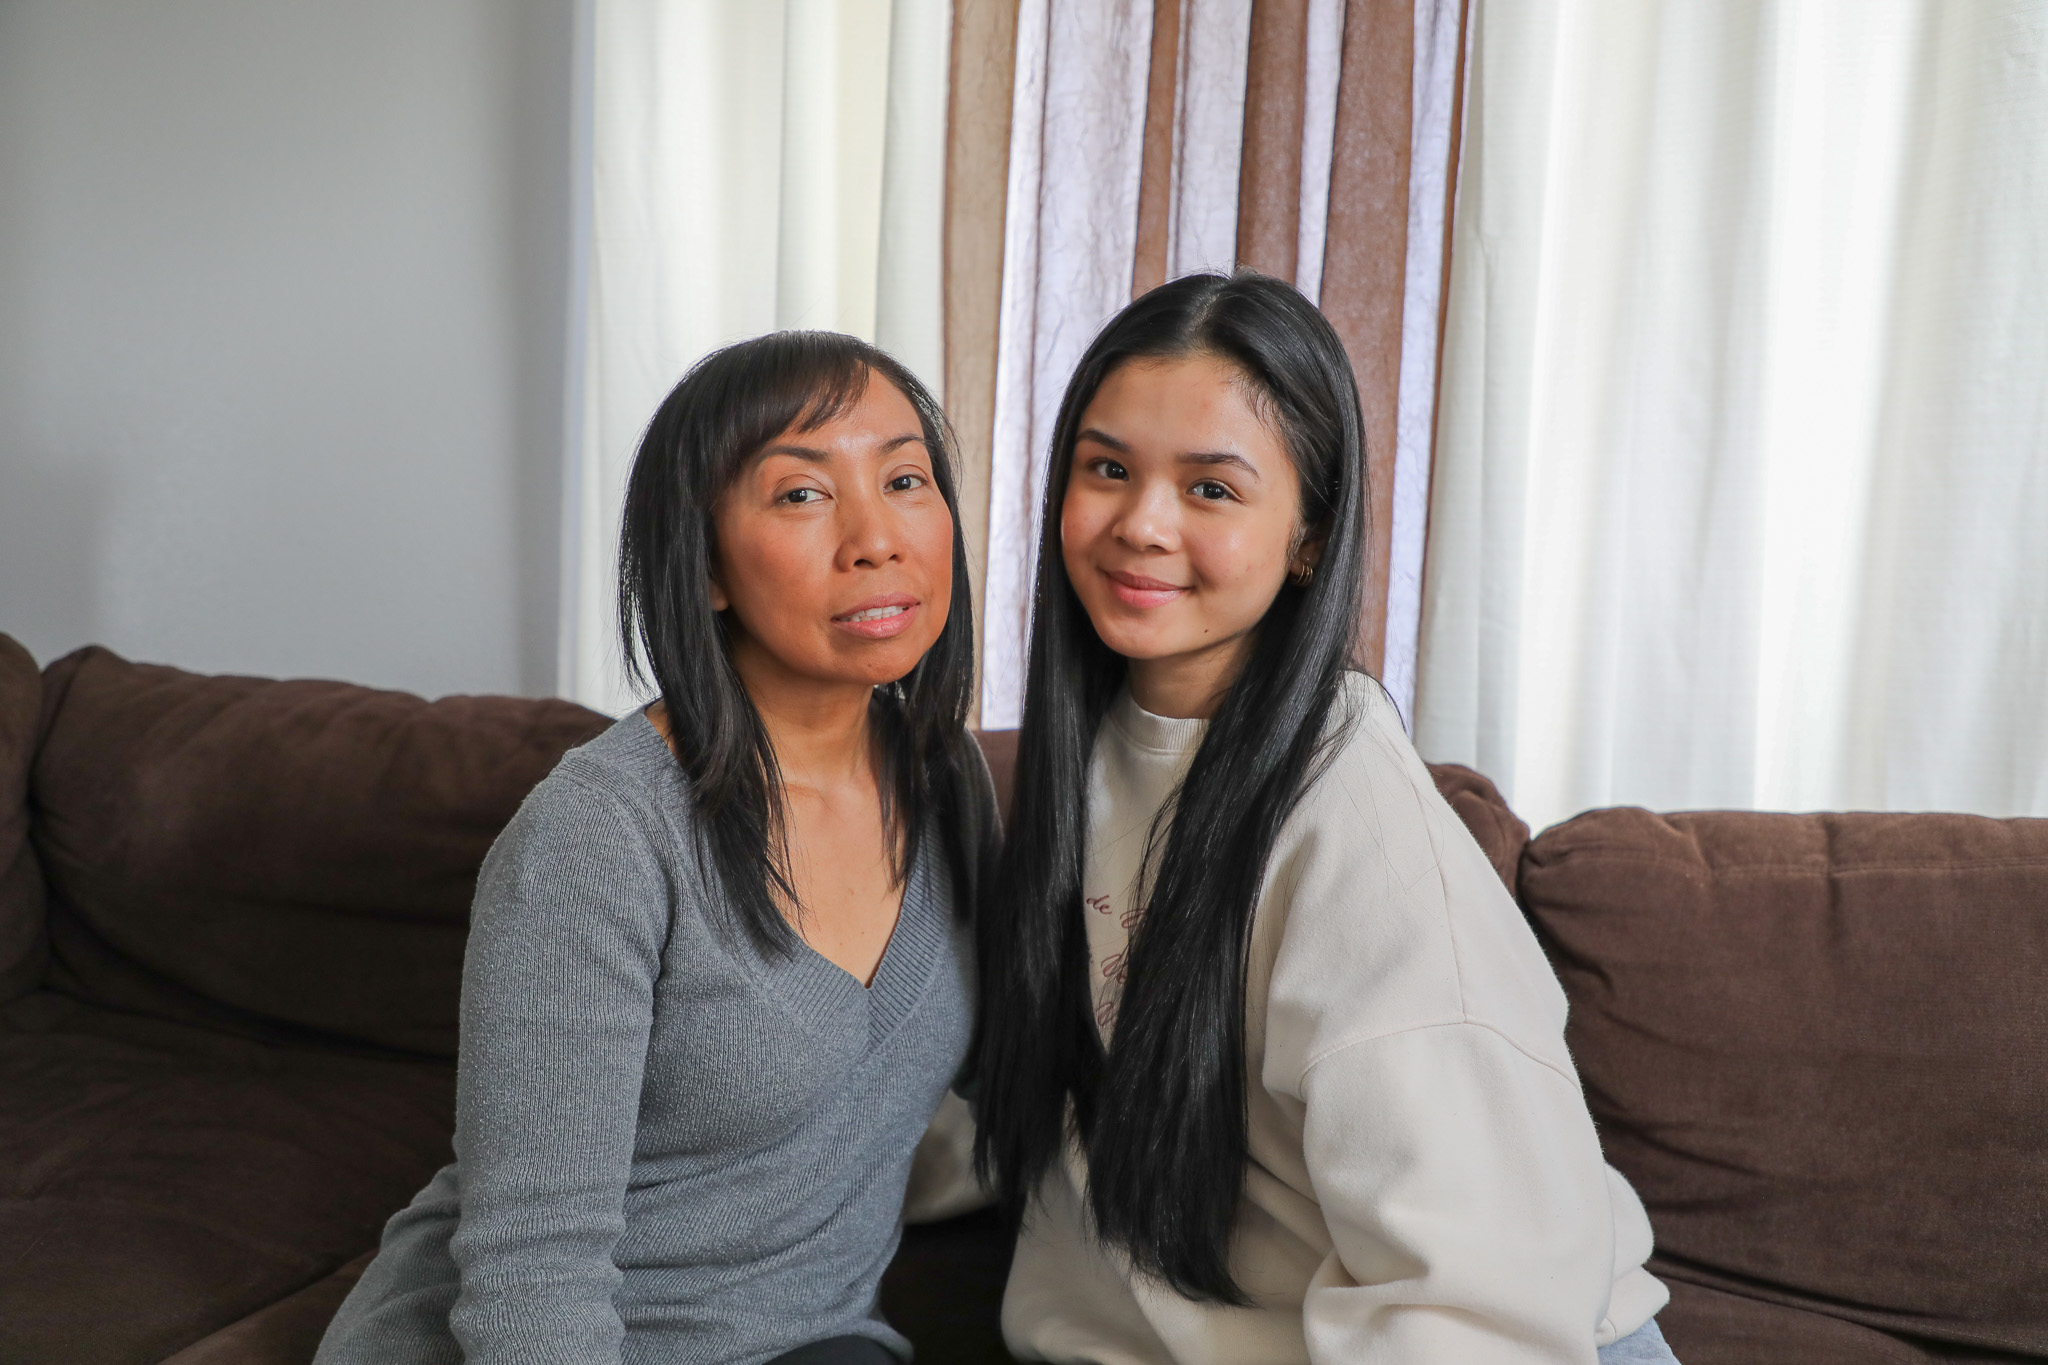 photo of foster parent Daisy (left) and her foster child, Jas (right), seated on a brown couch with a window covered by white and maroon curtains in the background.